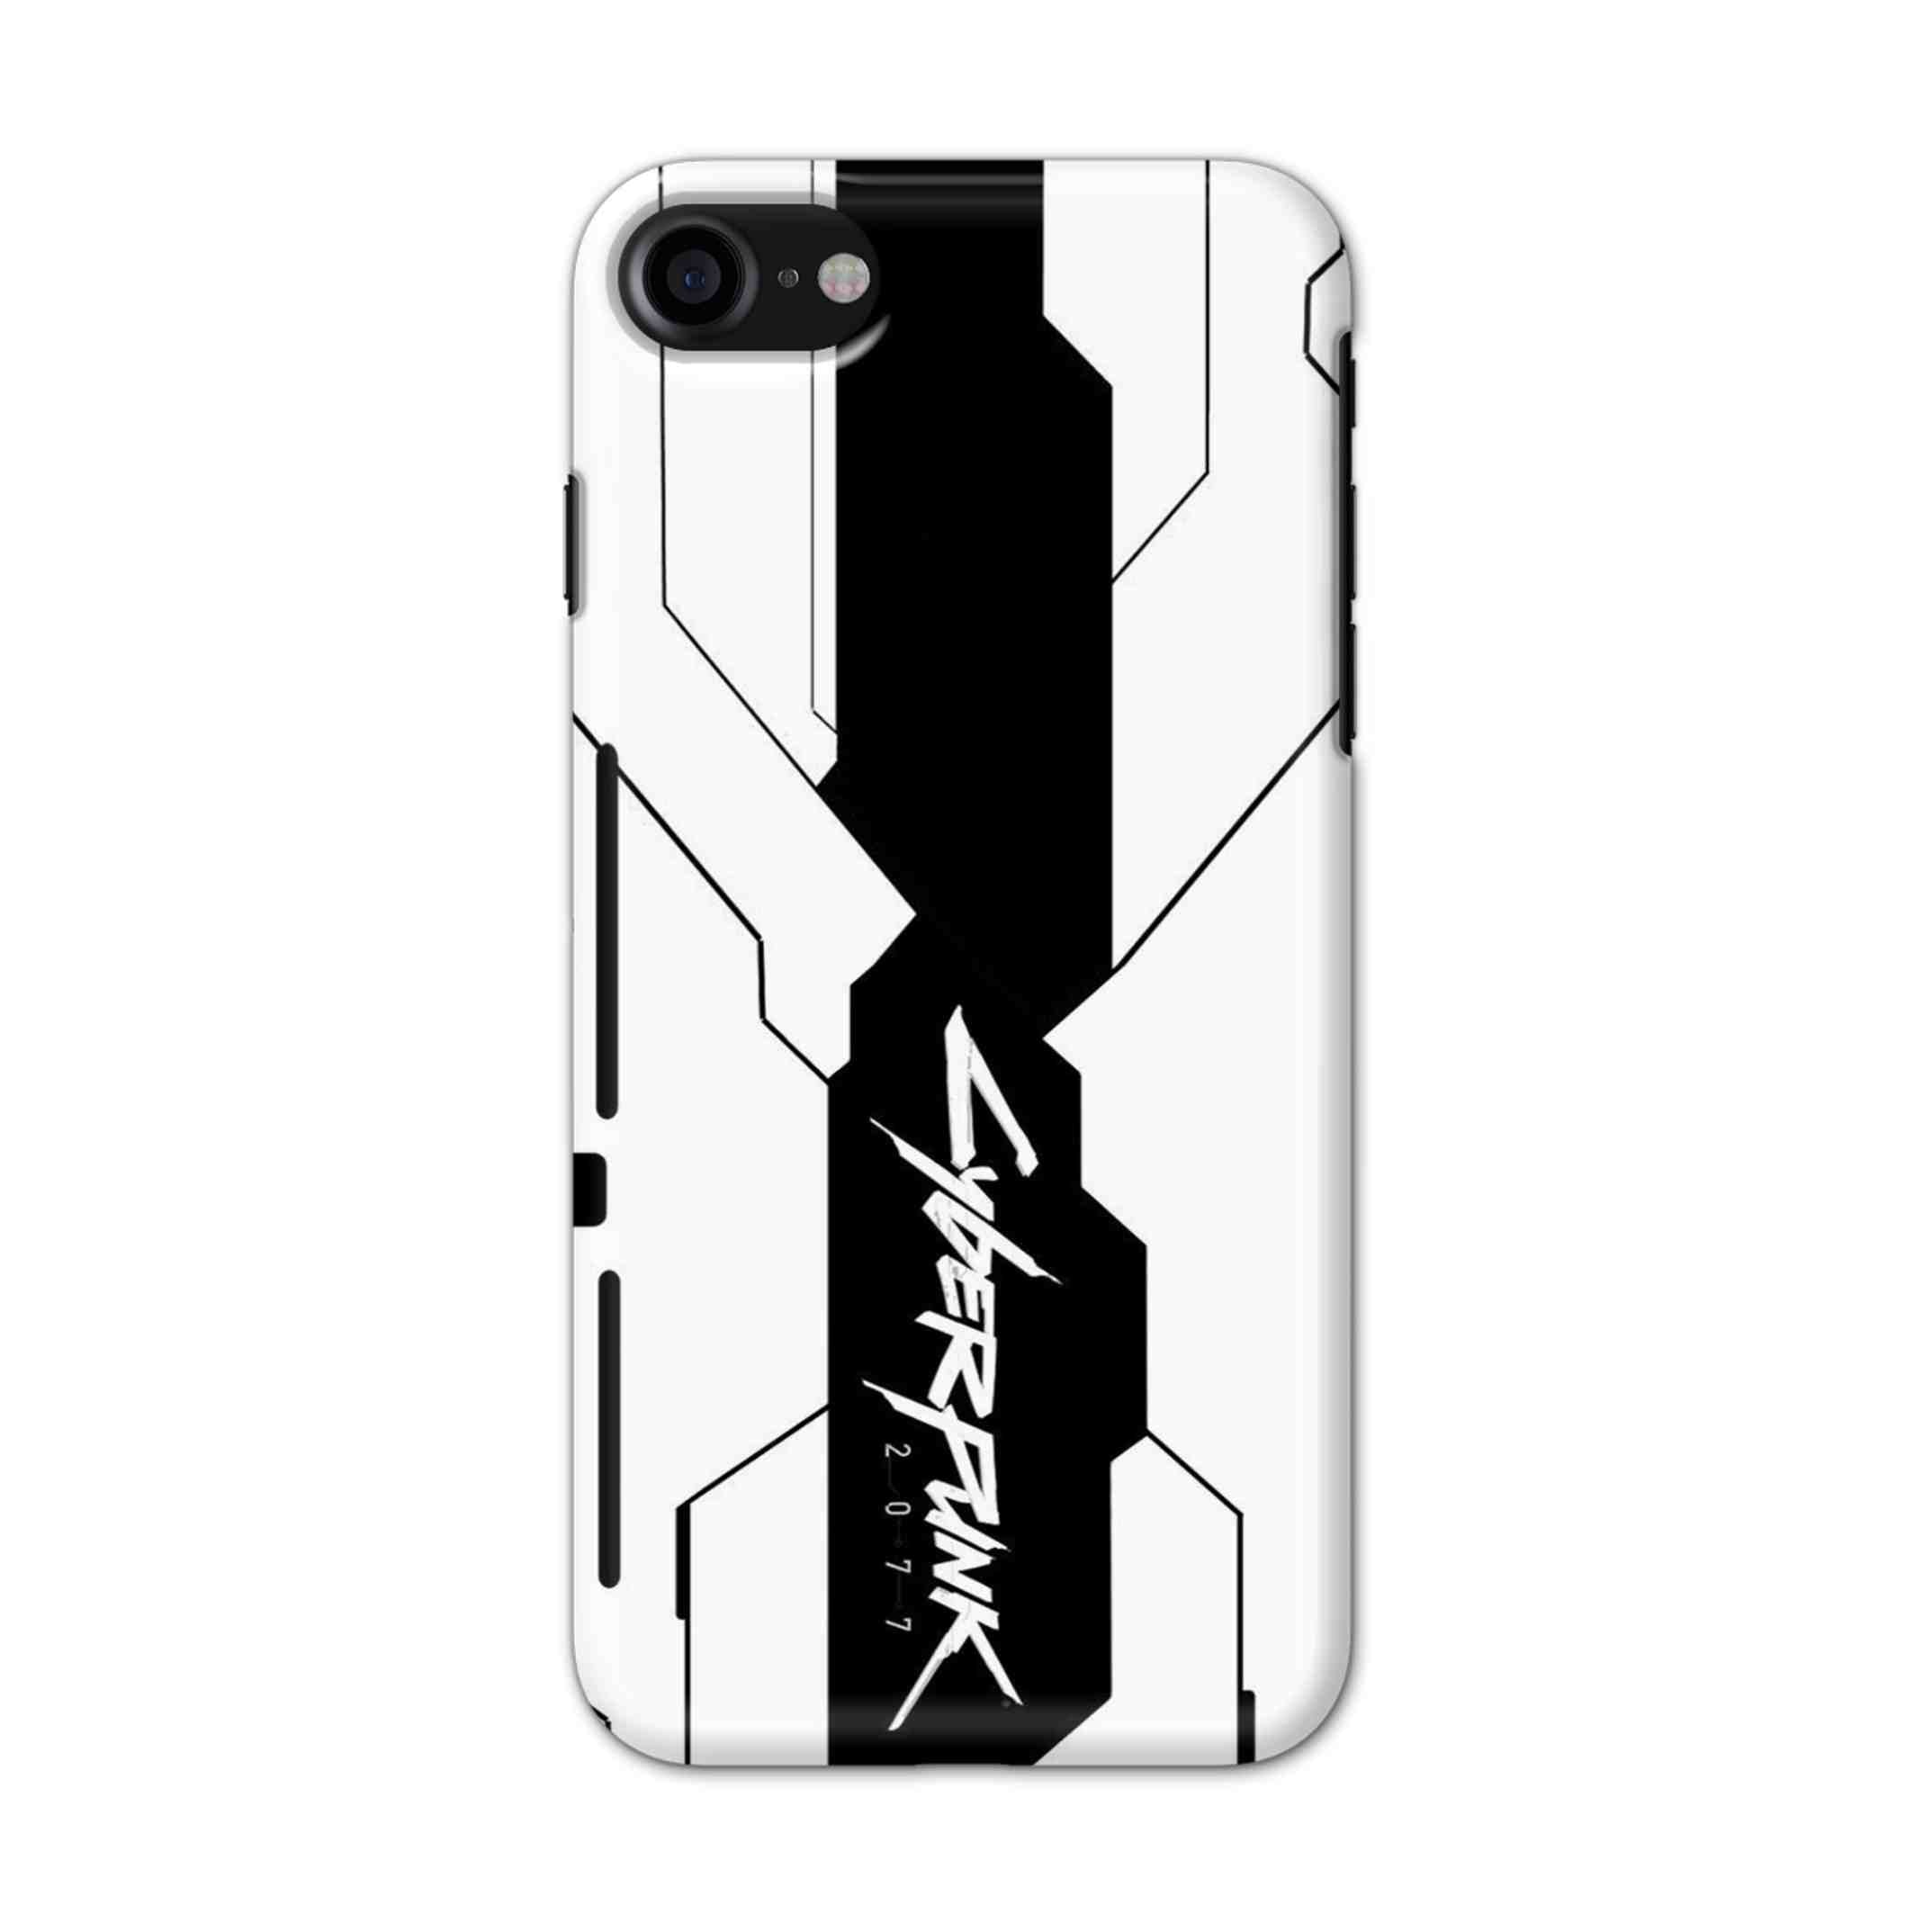 Buy Cyberpunk 2077 Hard Back Mobile Phone Case/Cover For iPhone 7 / 8 Online